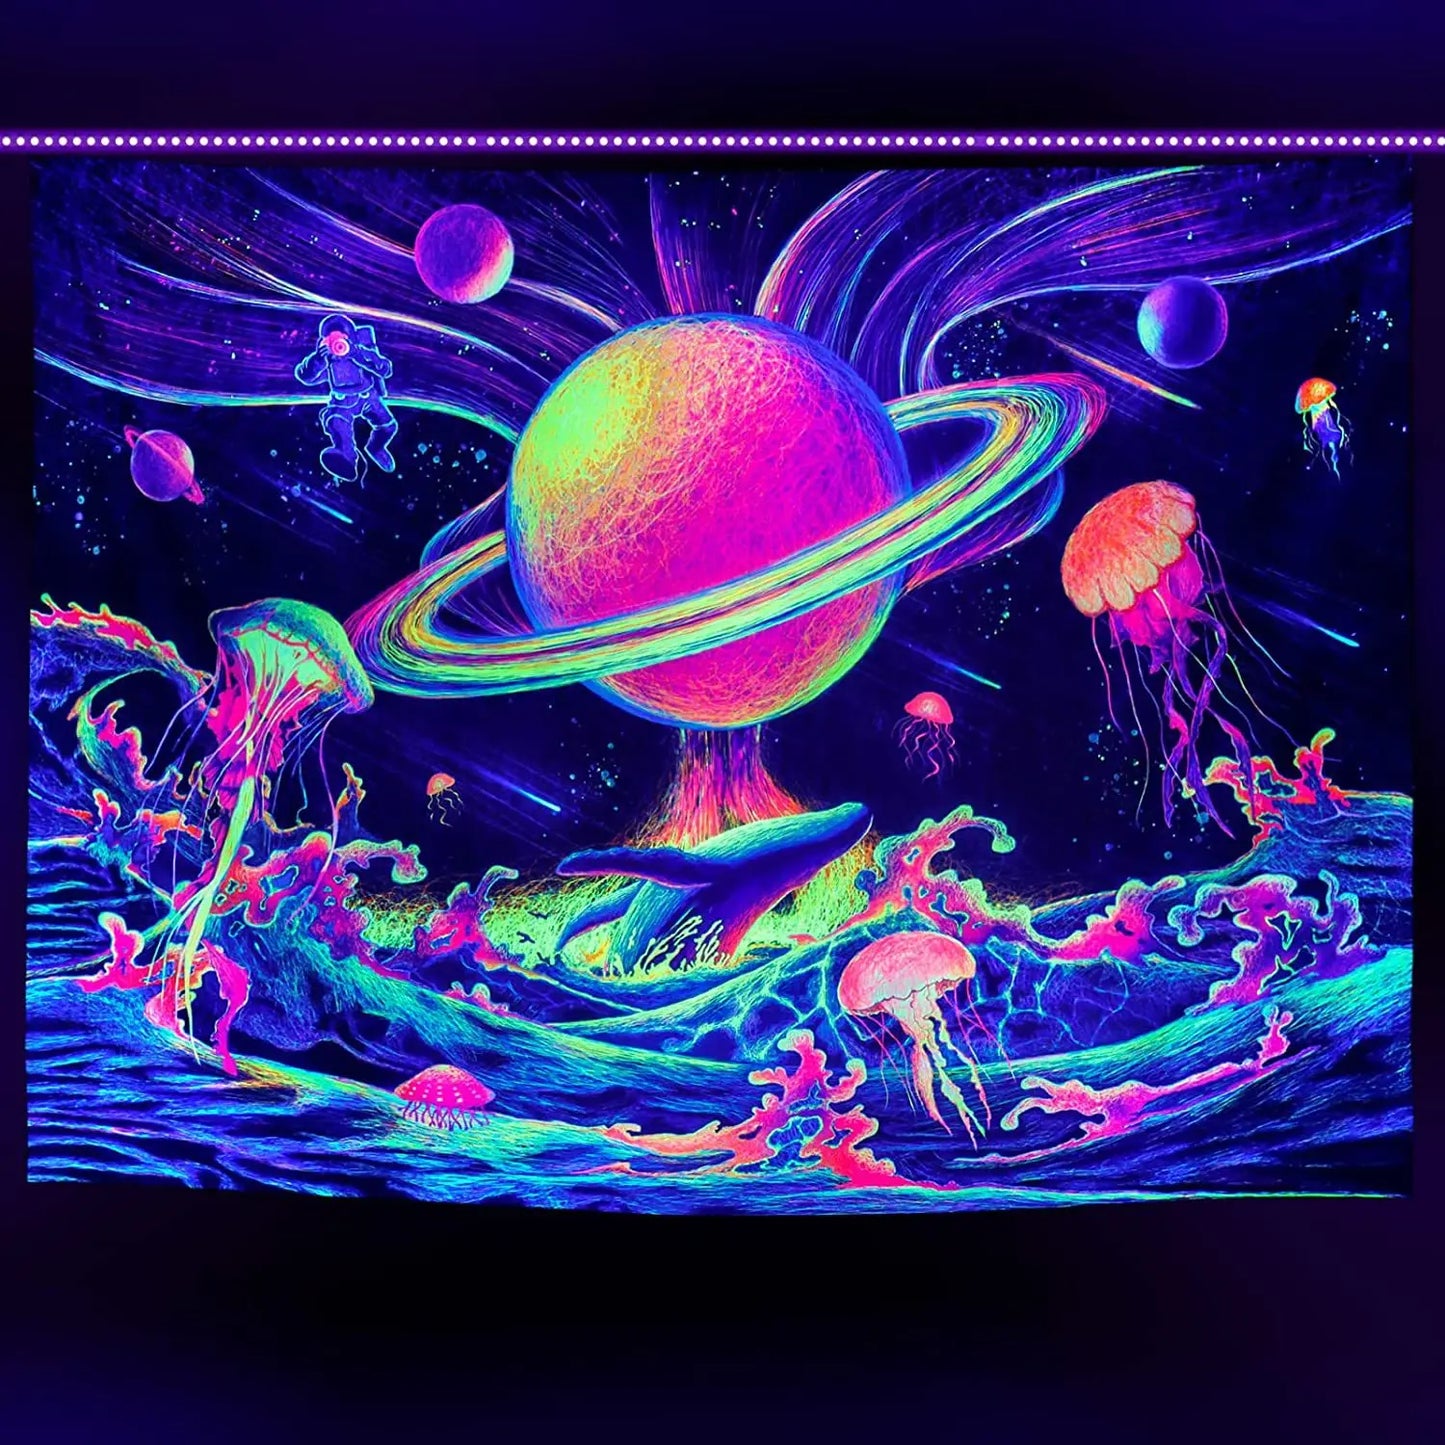 Astronaut UV Fluorescent Tapestry Aesthetics Wall Hanging Hippie Tapestry Bedroom Independent Room Decoration